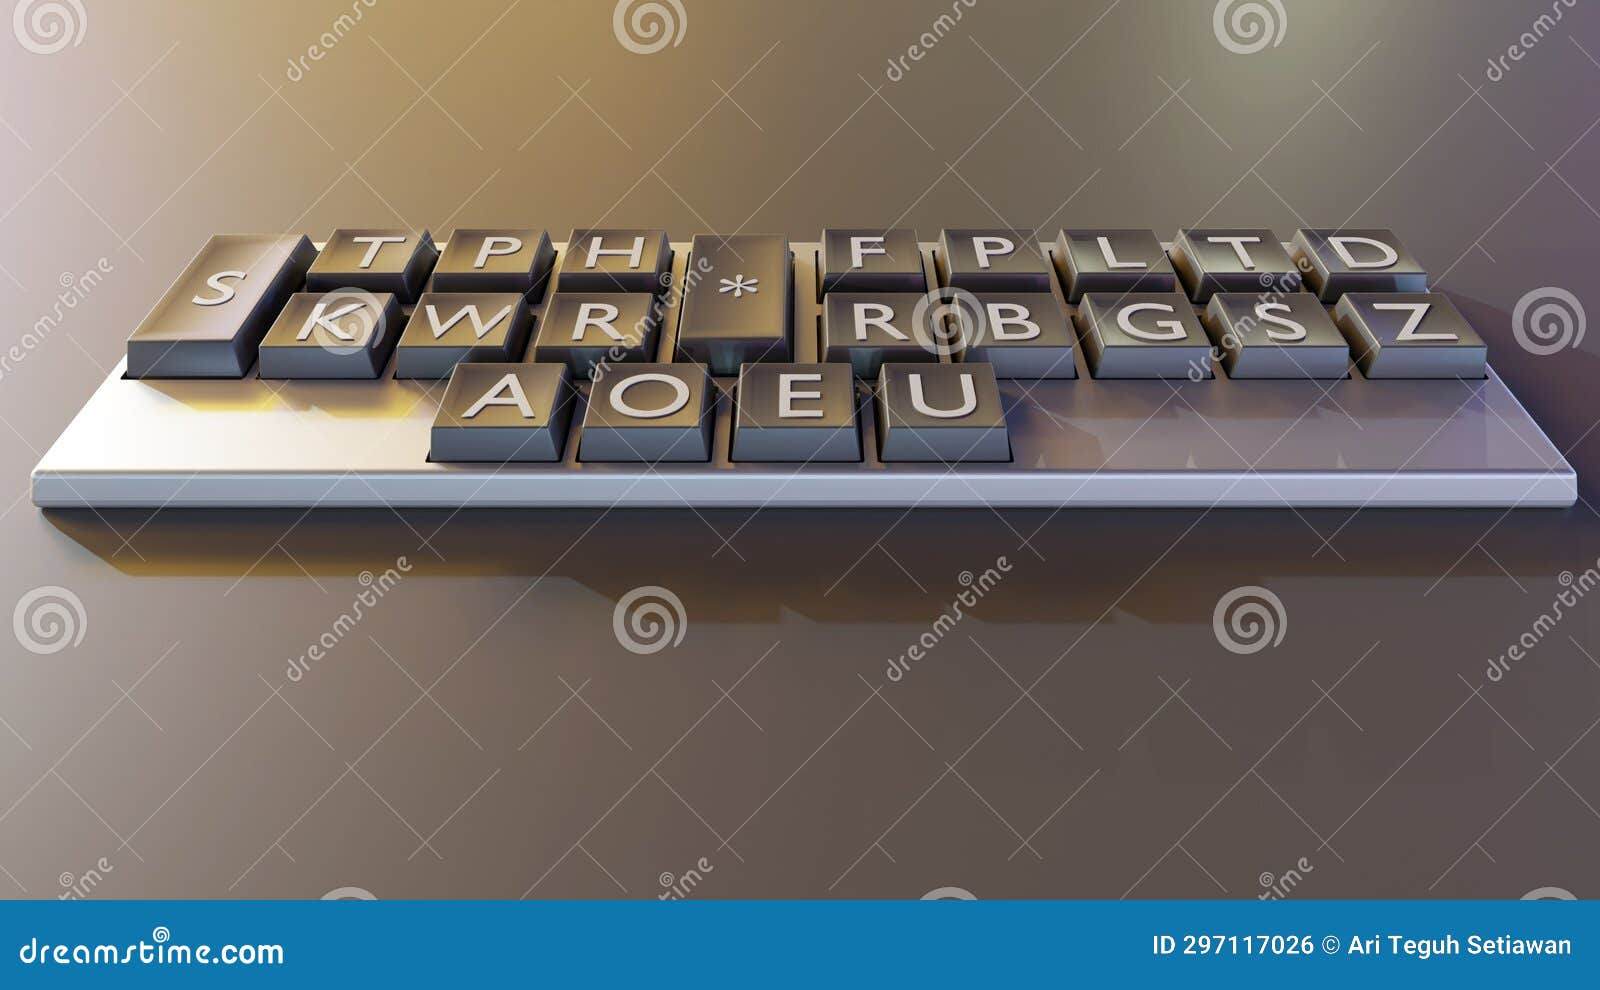 Stenotype Keyboard, Also Known As a Shorthand Keyboard, or Steno Writer ...